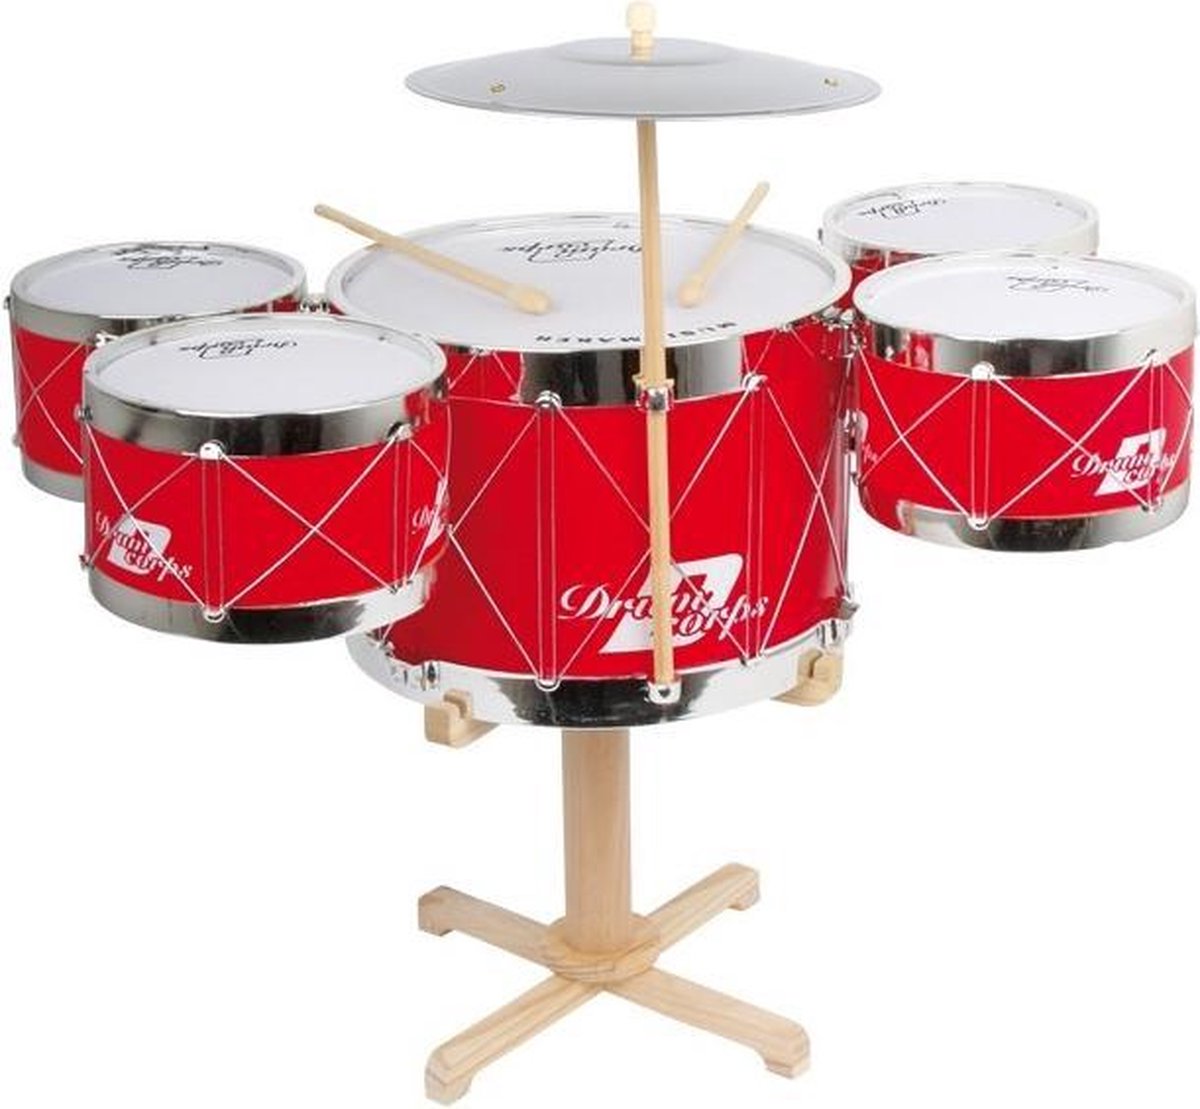 Small Foot drumstel 62 x 40 cm - Rood